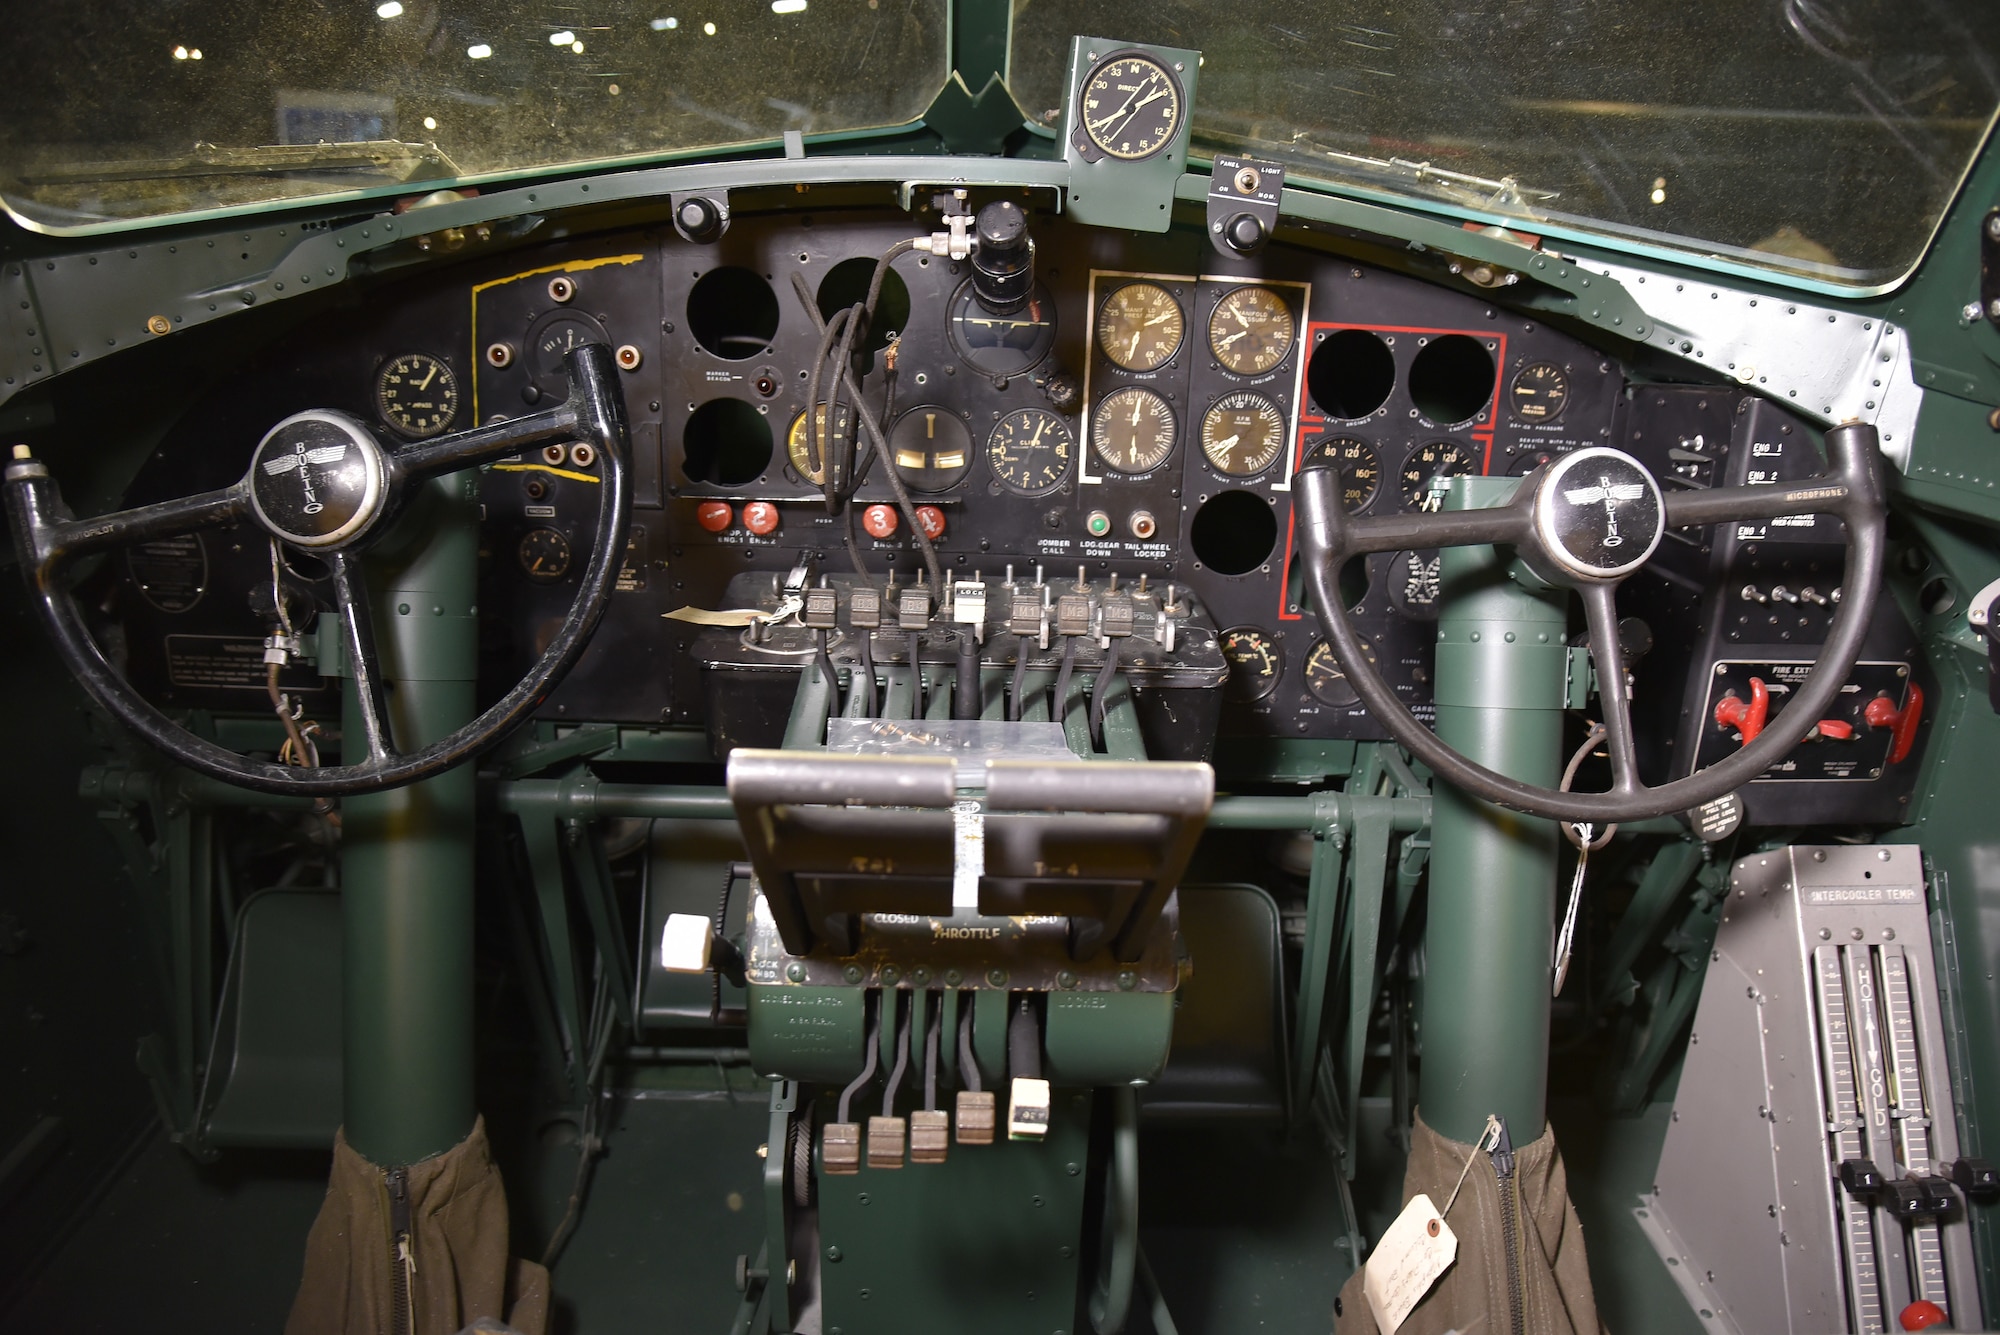 DAYTON, Ohio -- Cockpit view of the Boeing B-17F Memphis Belle on Nov. 18, 2018 at the National Museum of the U.S. Air Force. The cockpit was still undergoing restoration at the time this photo was taken. (U.S. Air Force photo by Ken LaRock)